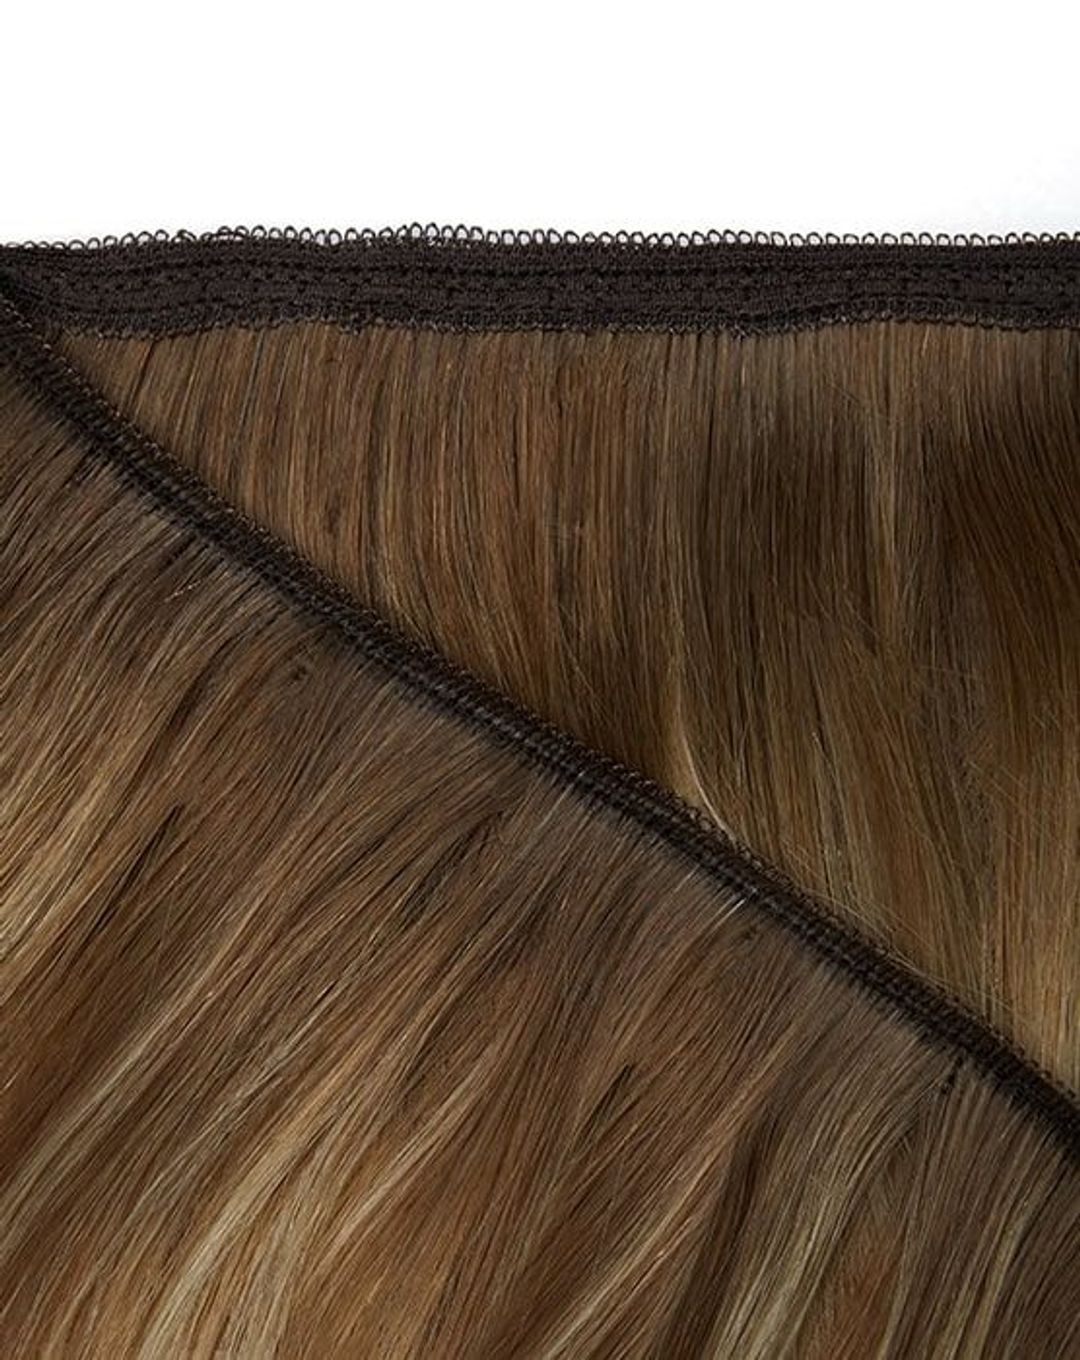 Beauty Works Gold Double Weft Extensions - Jet Black,18"